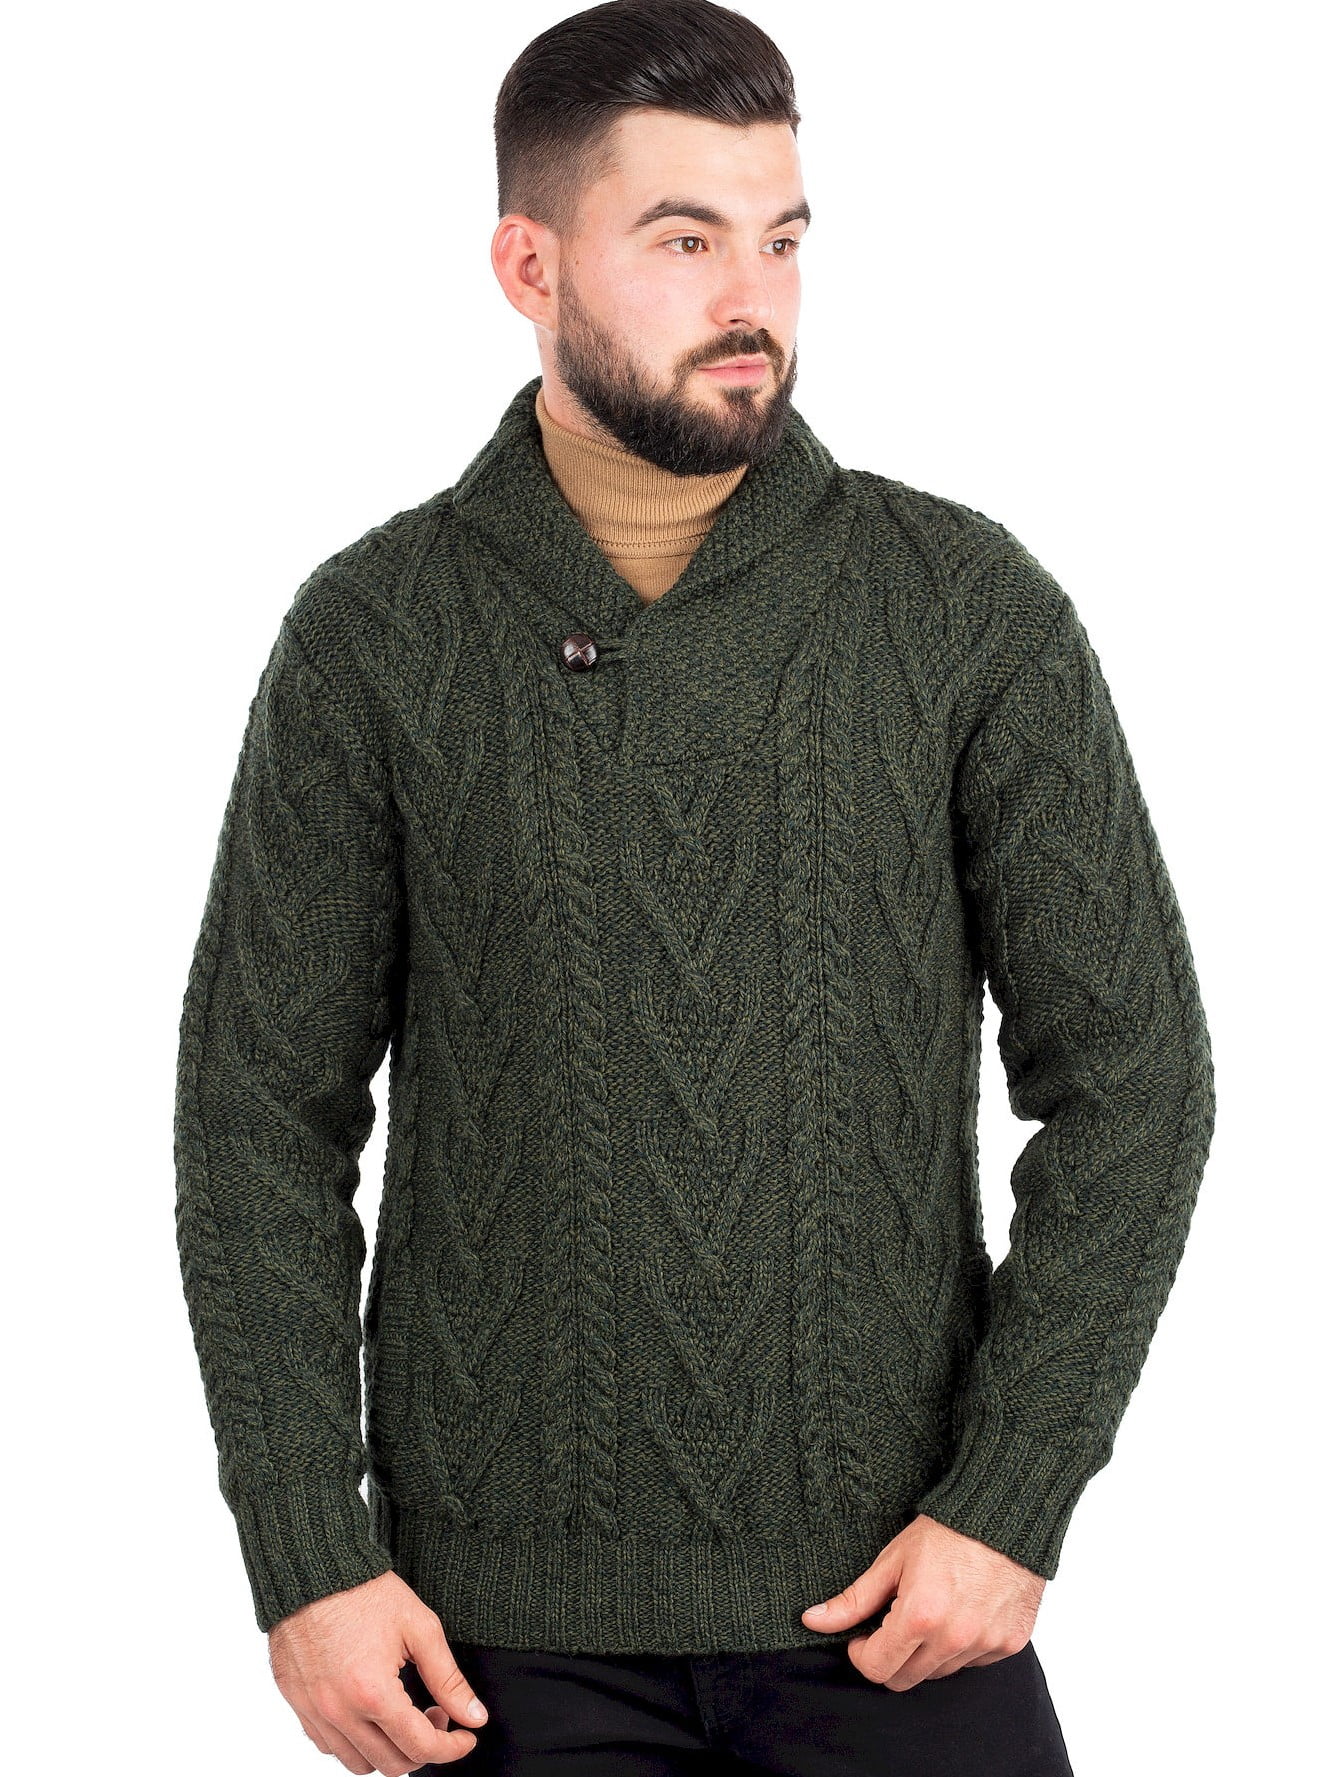 Percussion Half Button Pullover Jumper Knitted Sweater Green 